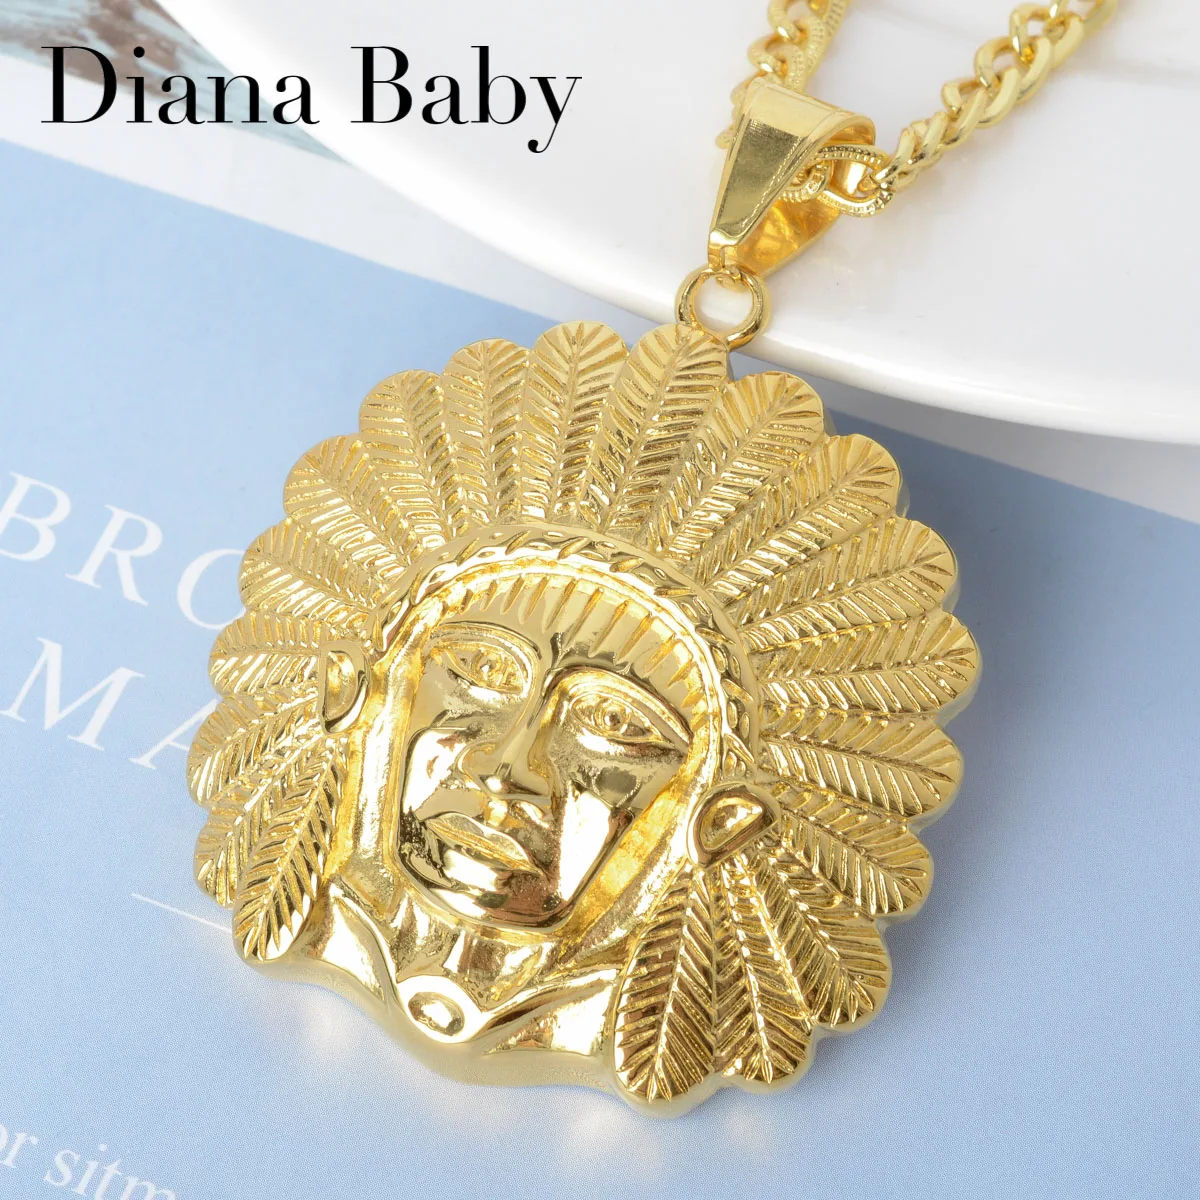 

Diana Baby Jewelry Hip Hop Stainless Steel Indian Chief Pendent Necklace 60cm For Men Rapper High Quality Gold Plated